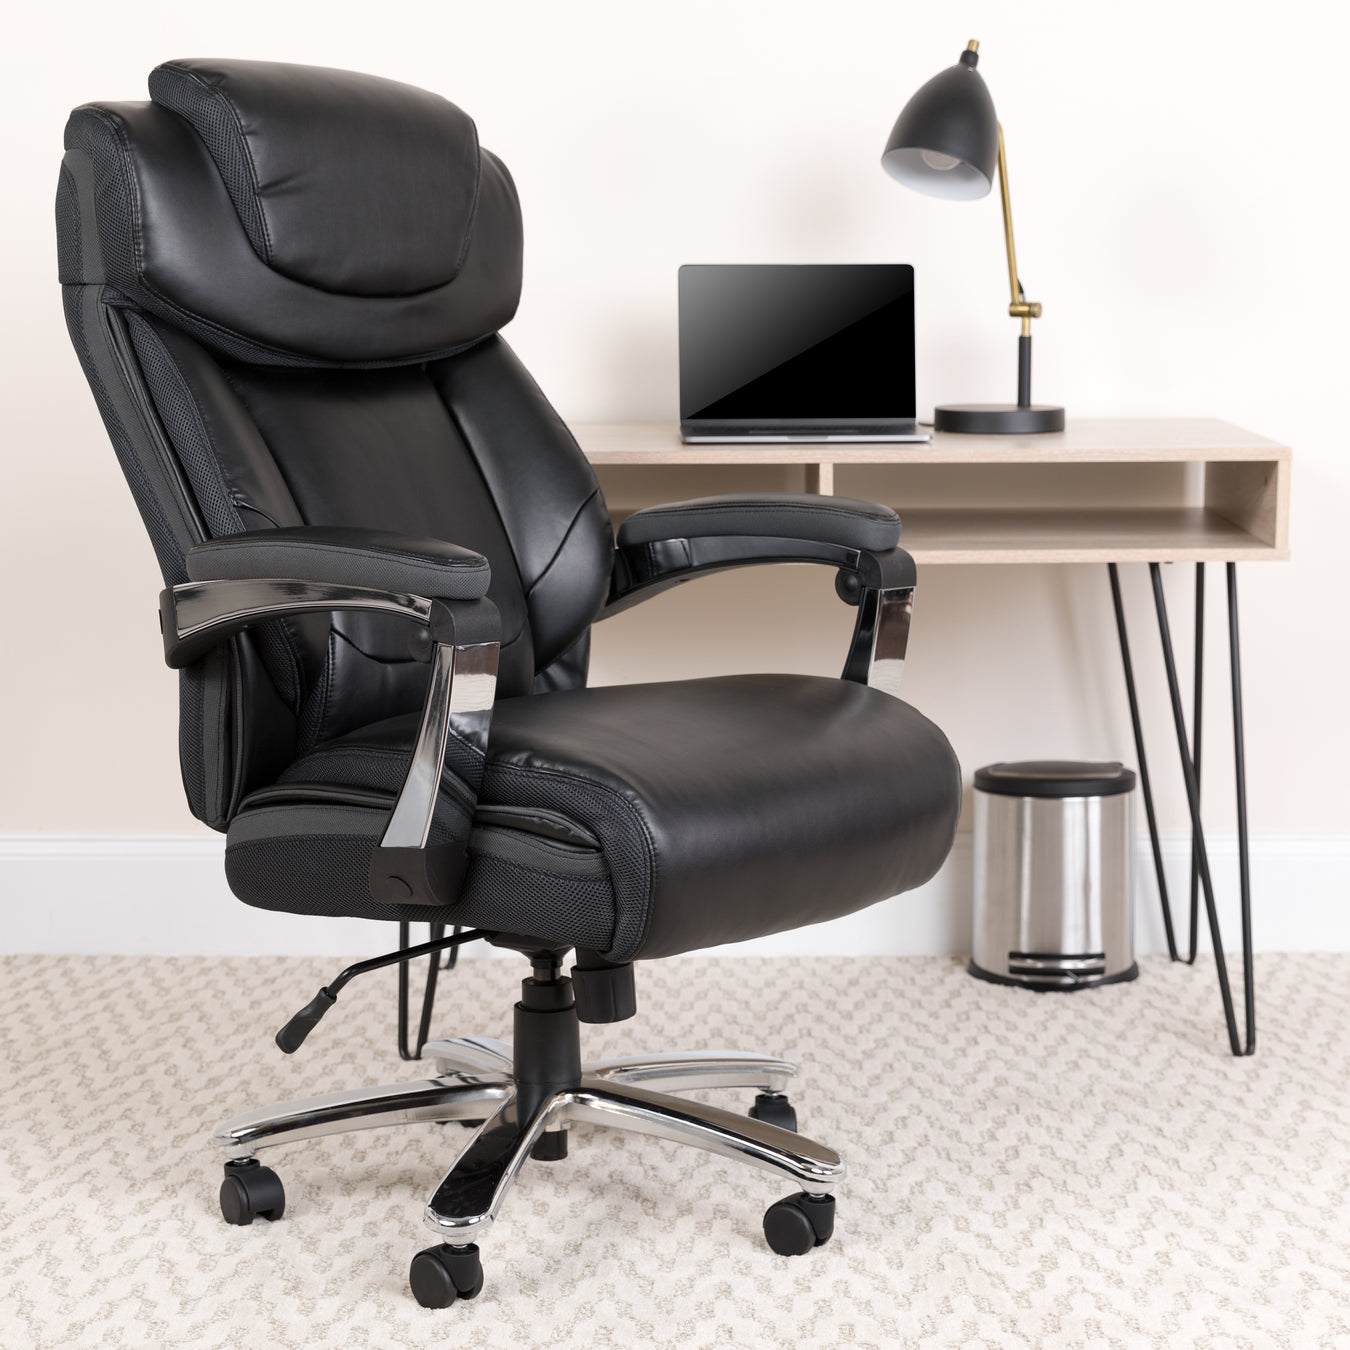 Emma + Oliver Mobile Wooden Ergonomic Kneeling Office Chair in Gray Fabric